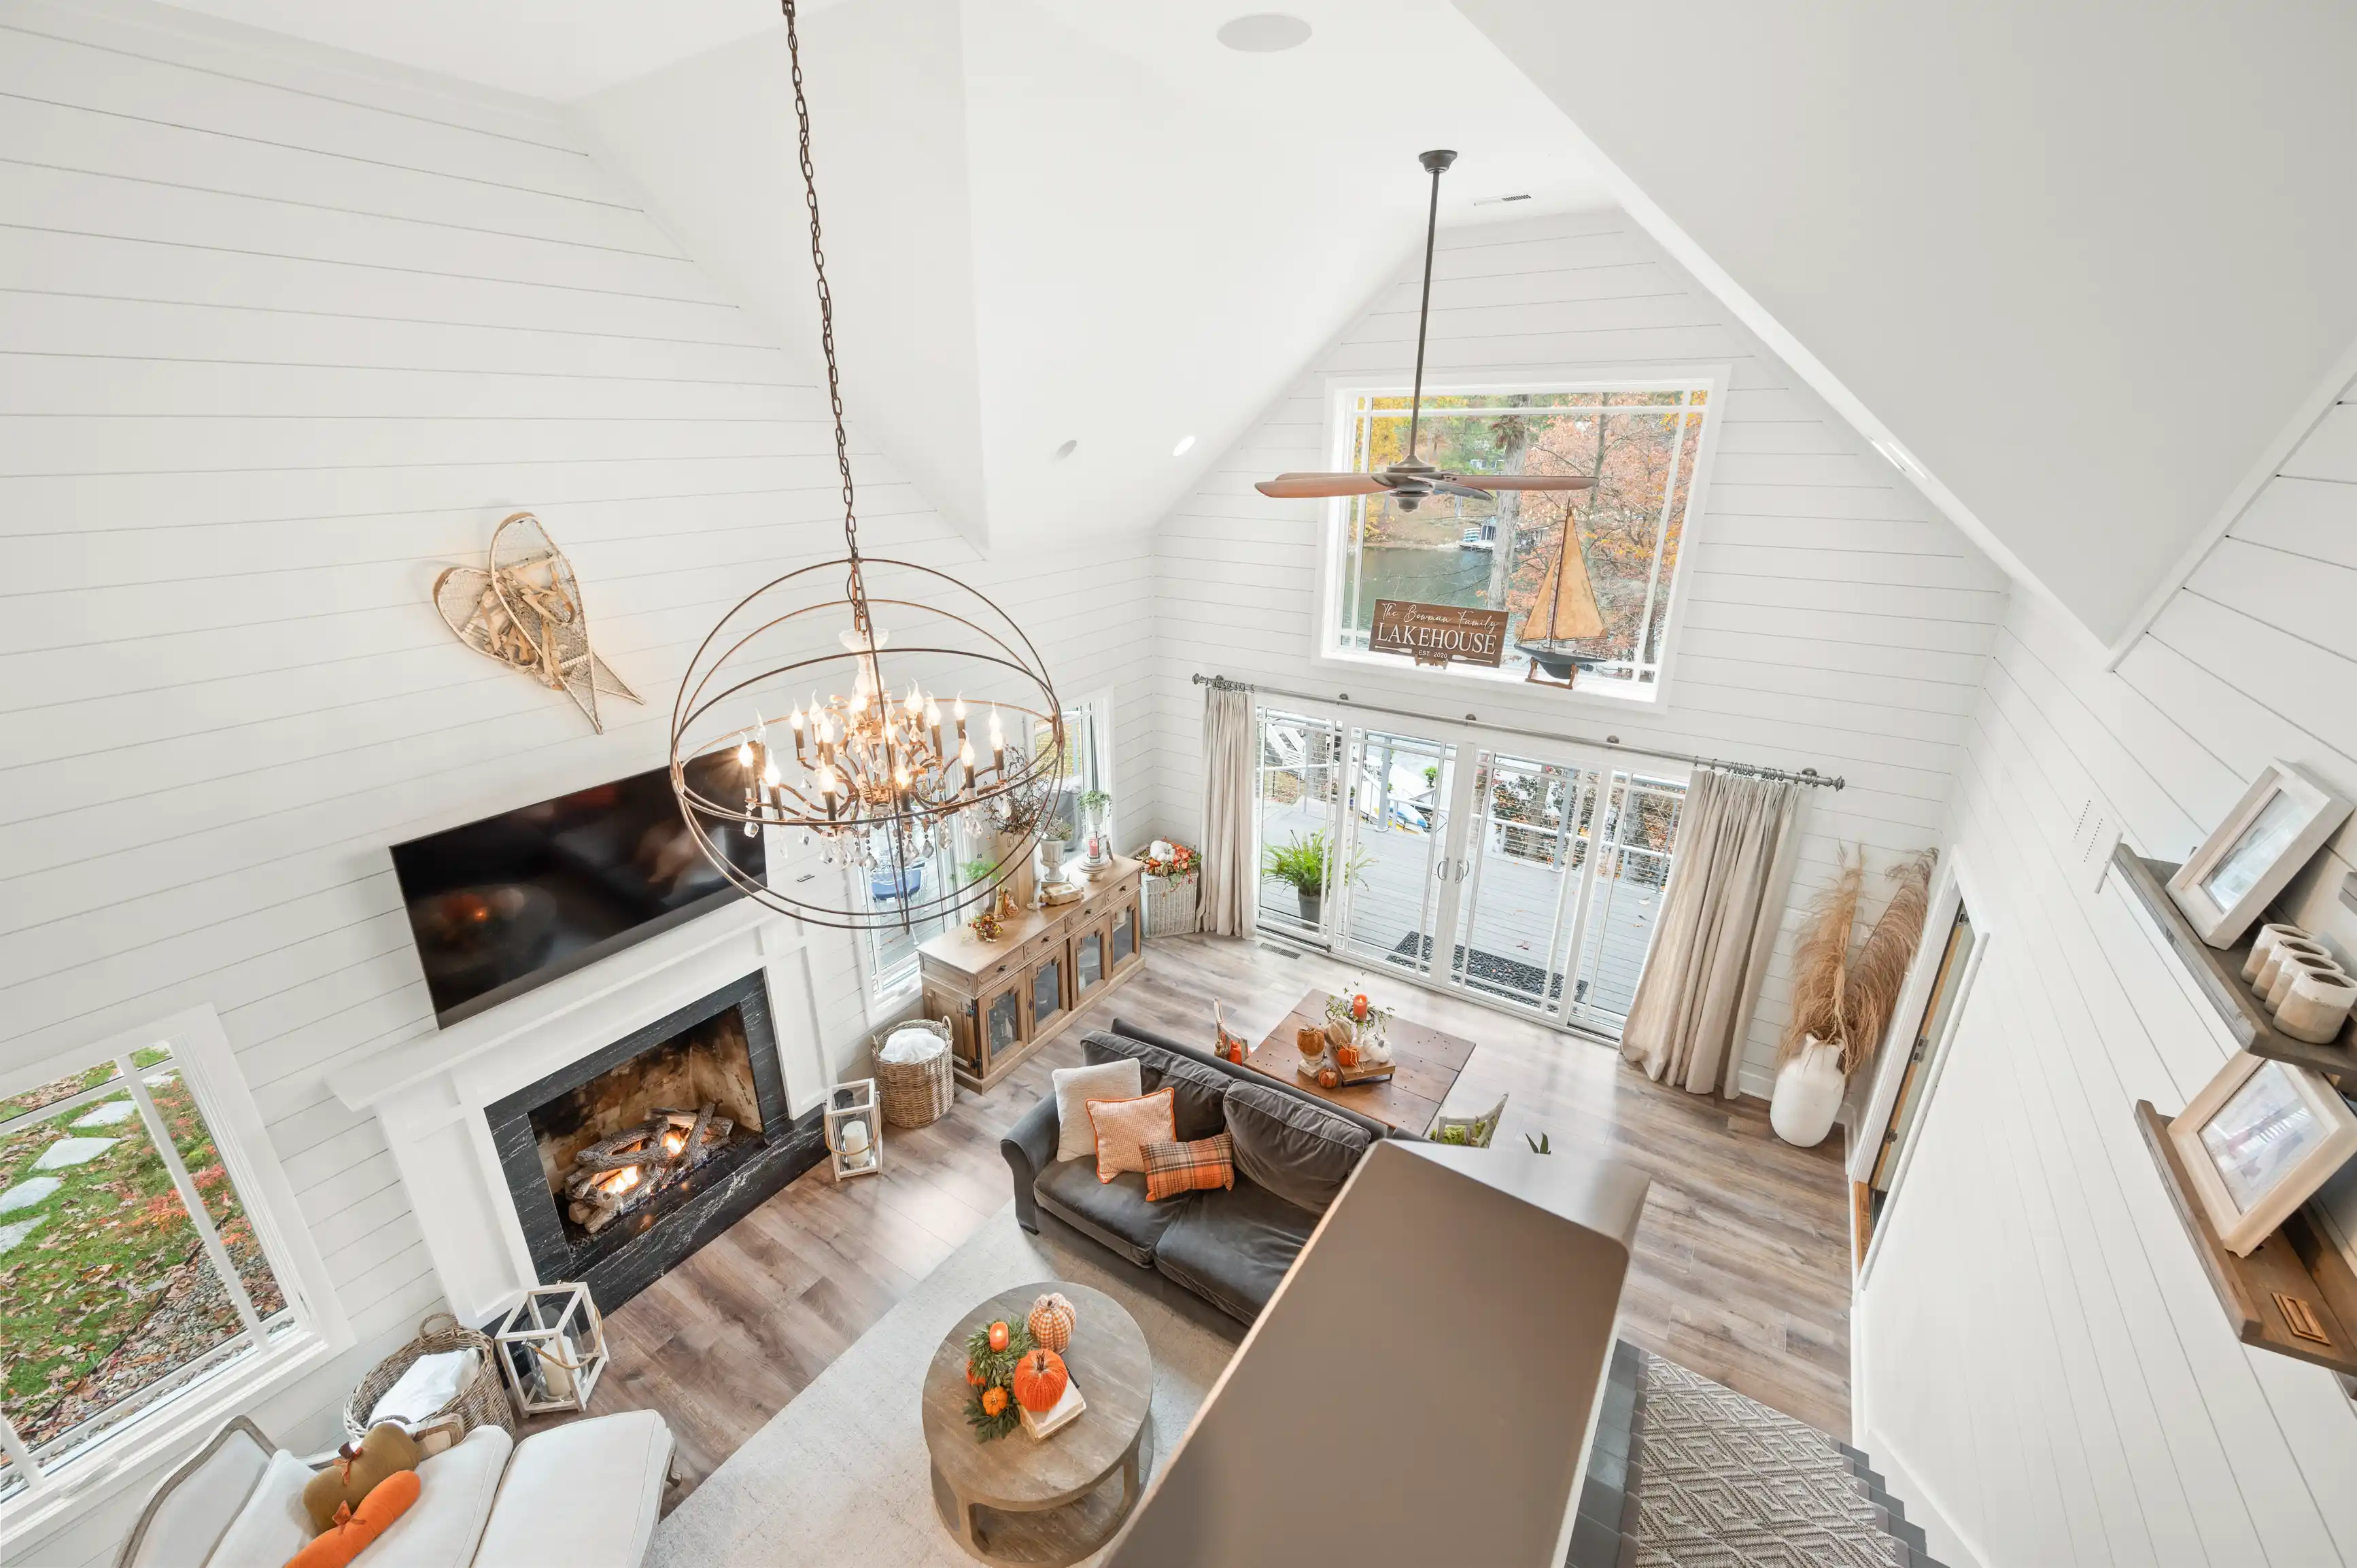 Bright, airy living room with vaulted ceilings, modern chandelier, fireplace, and French doors opening to a balcony, with autumnal decor touches.